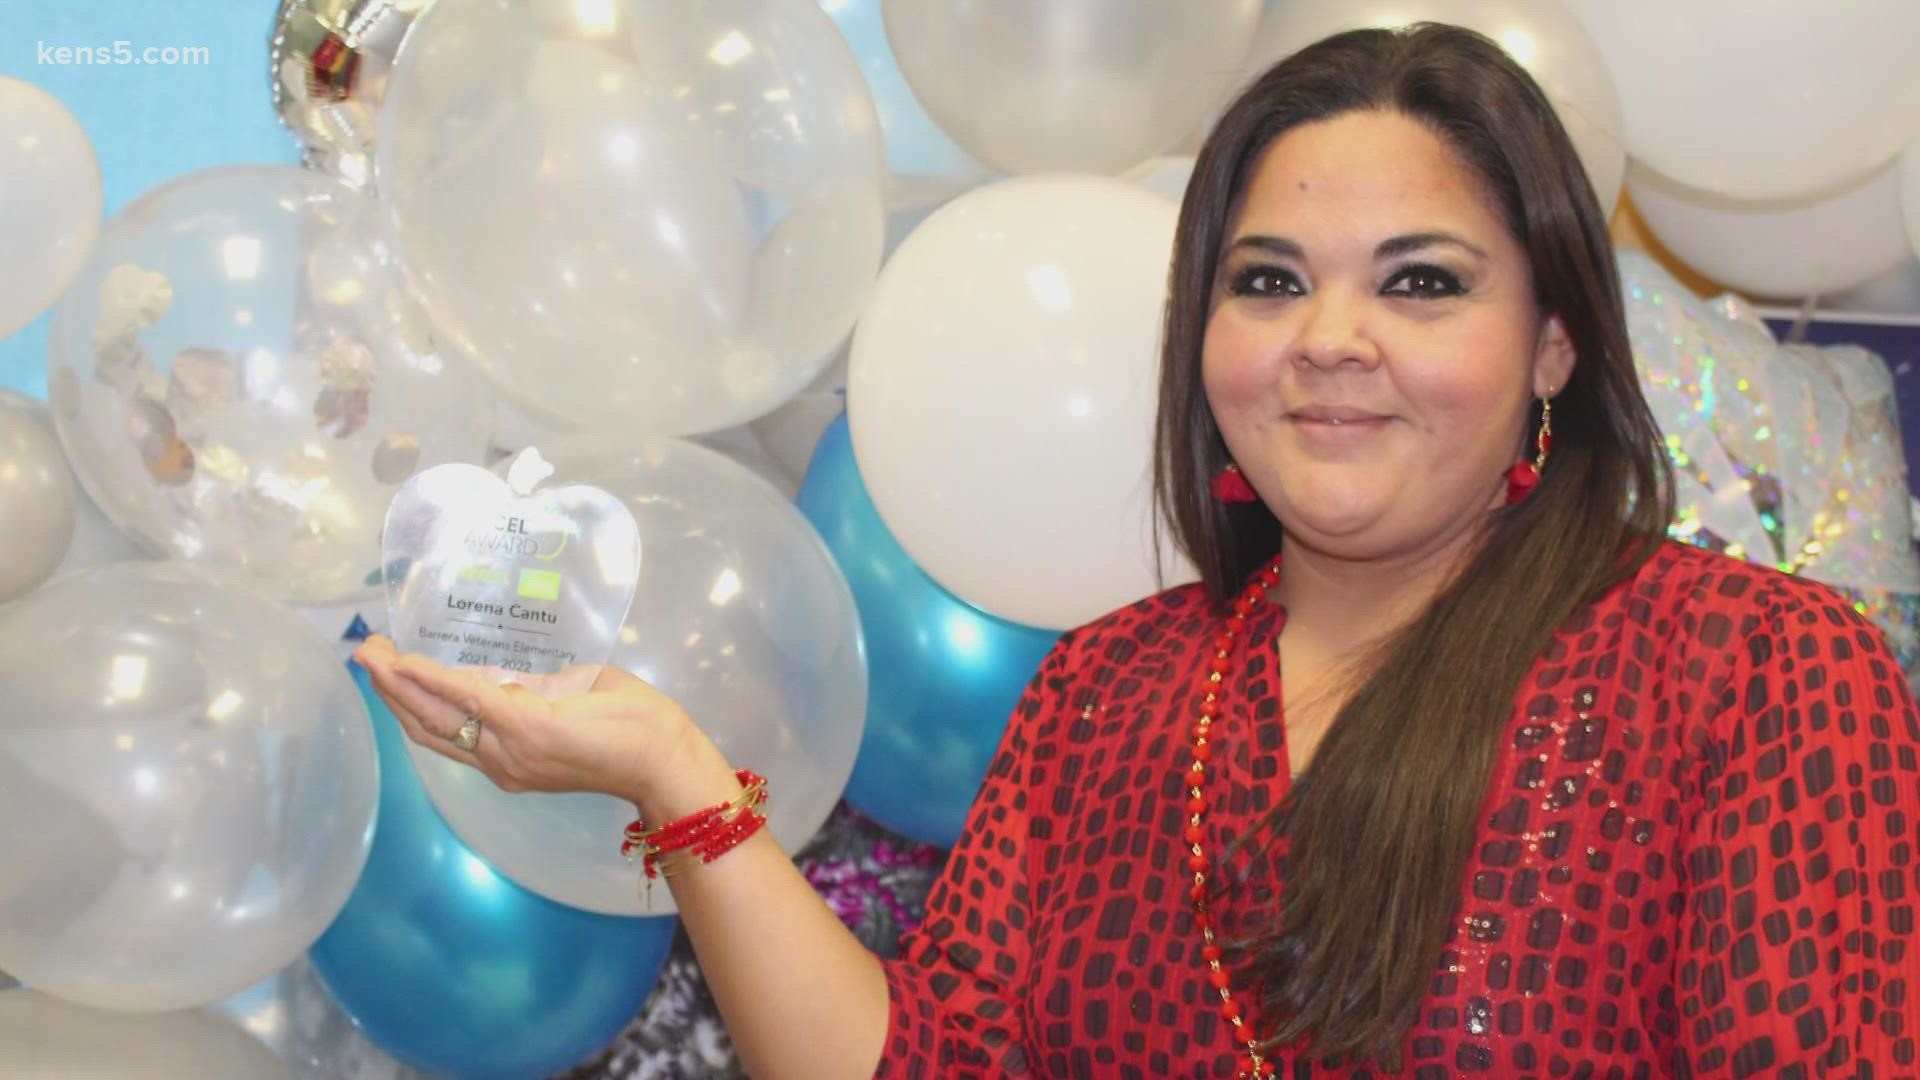 With her big heart for children, Lorena Cantu, a small-town girl herself from Eagle Pass, fits right in at Somerset ISD. She always knew she had it in her.